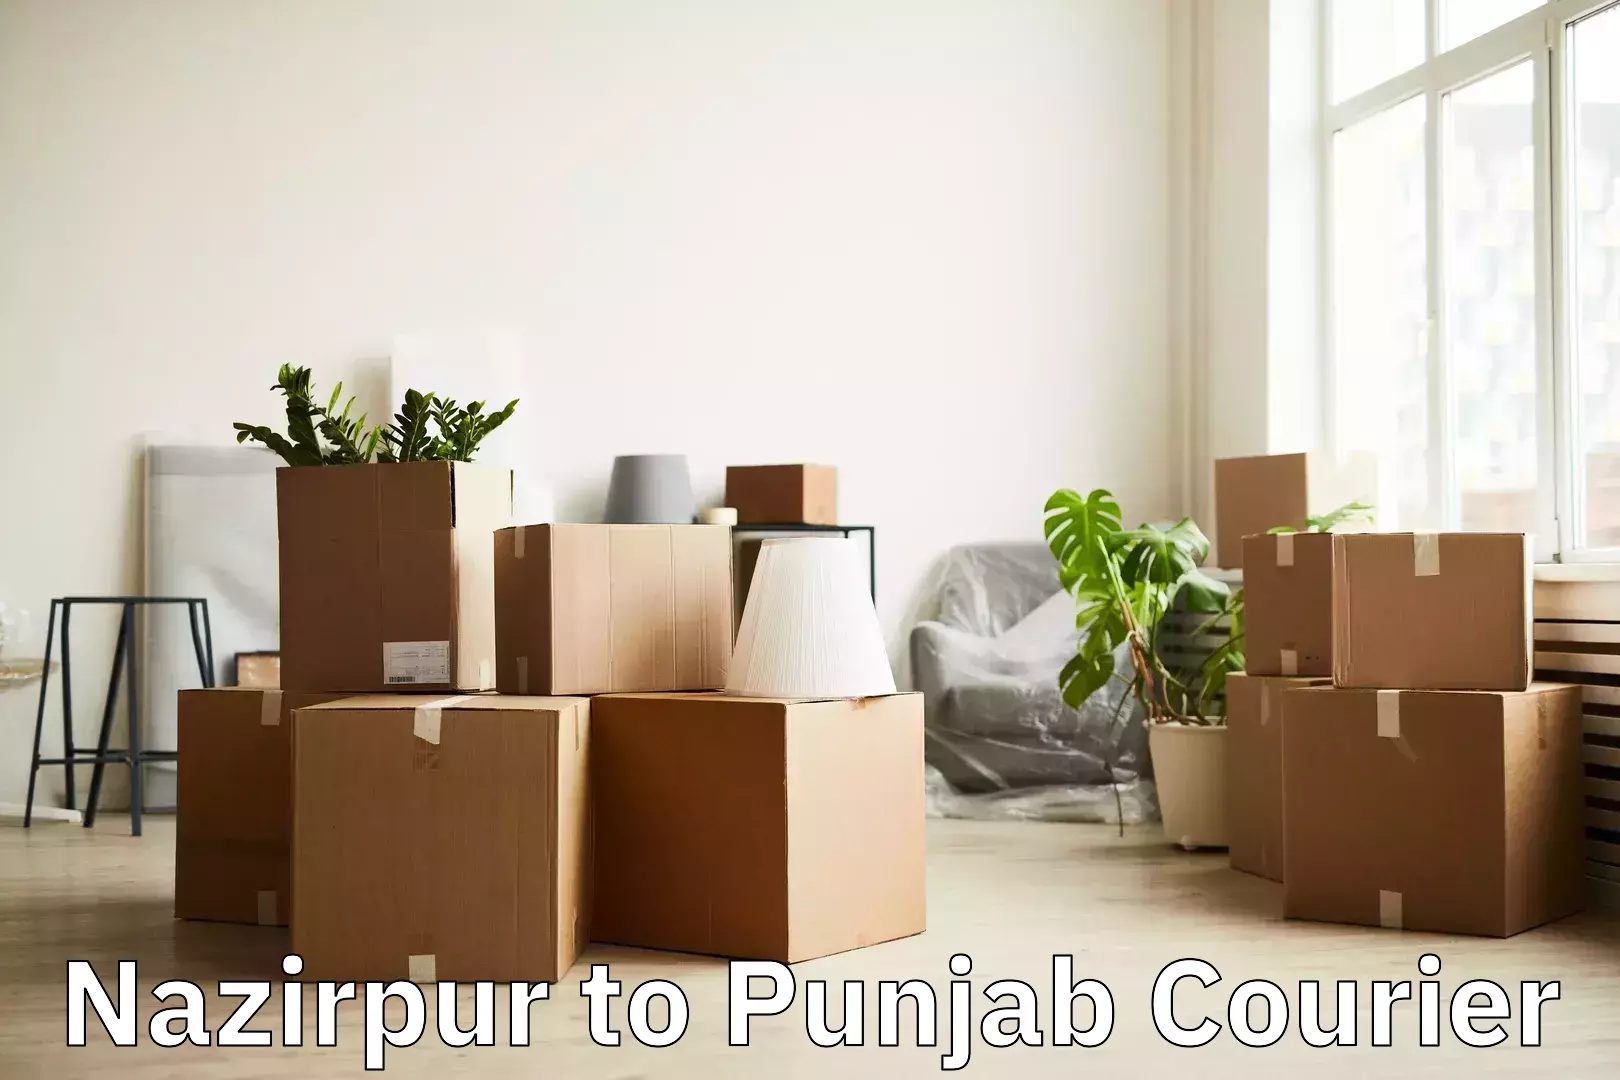 Overnight luggage courier Nazirpur to Jalandhar